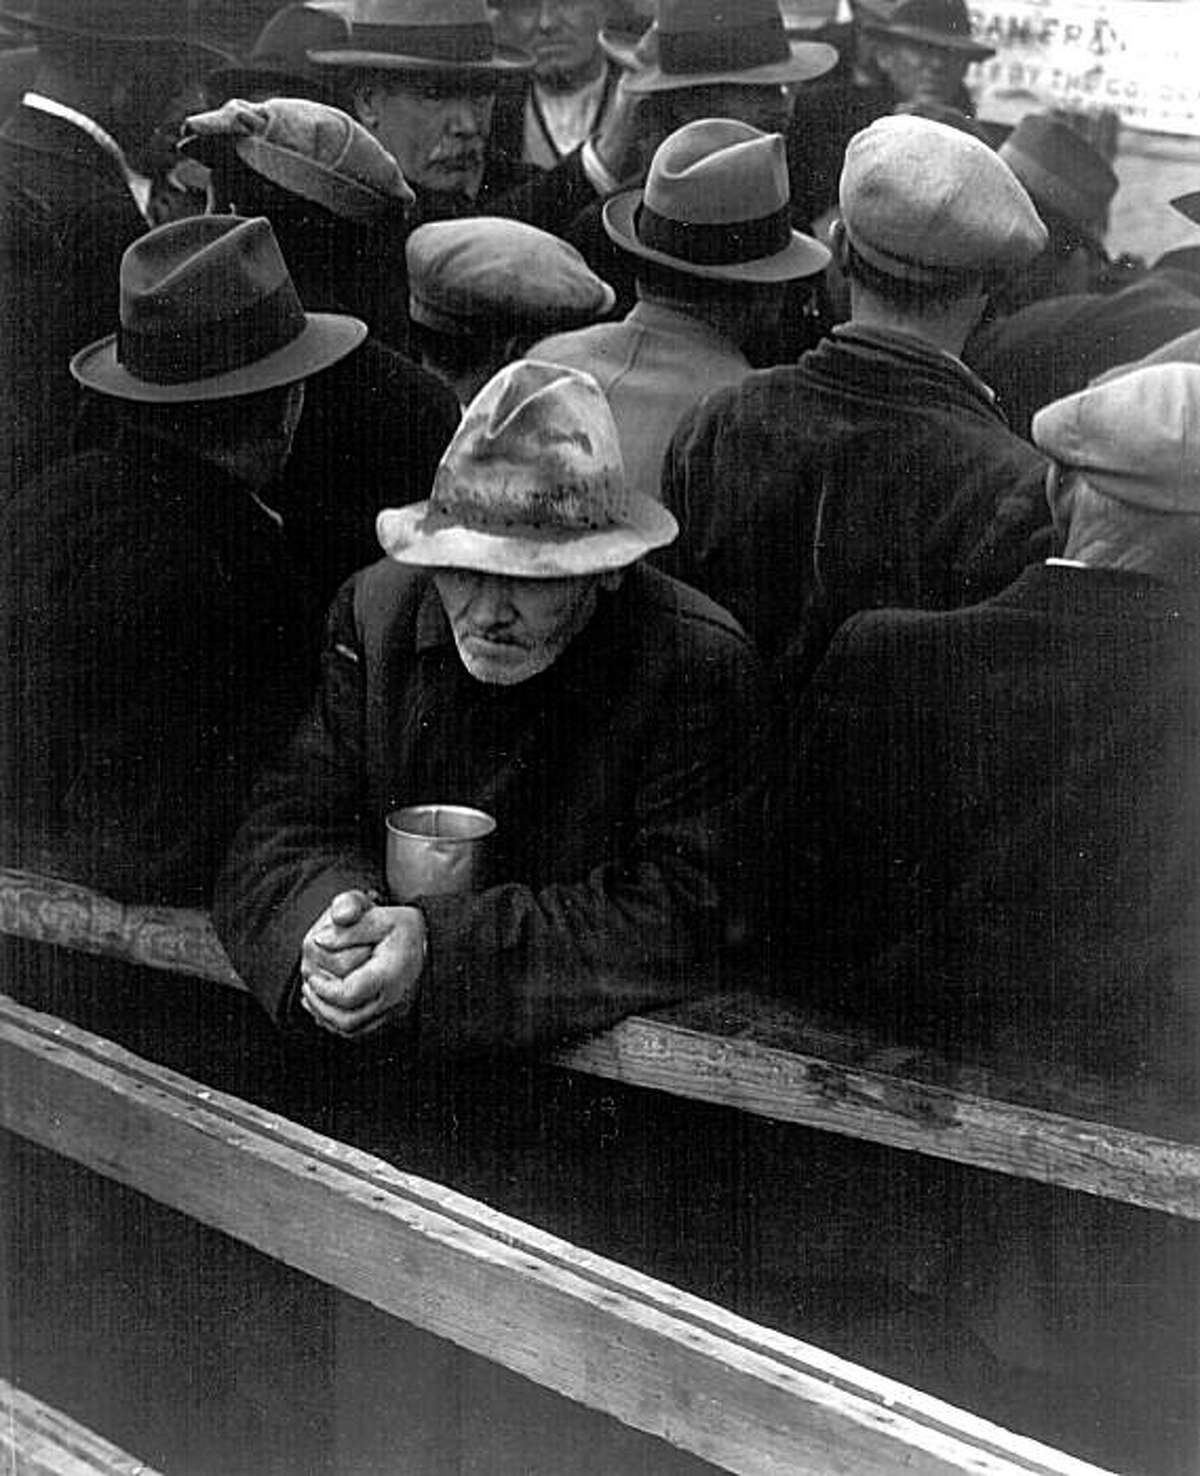 A man waits in a breadline in San Francisco in 1933, the year unemployment hit 24.9 percent.